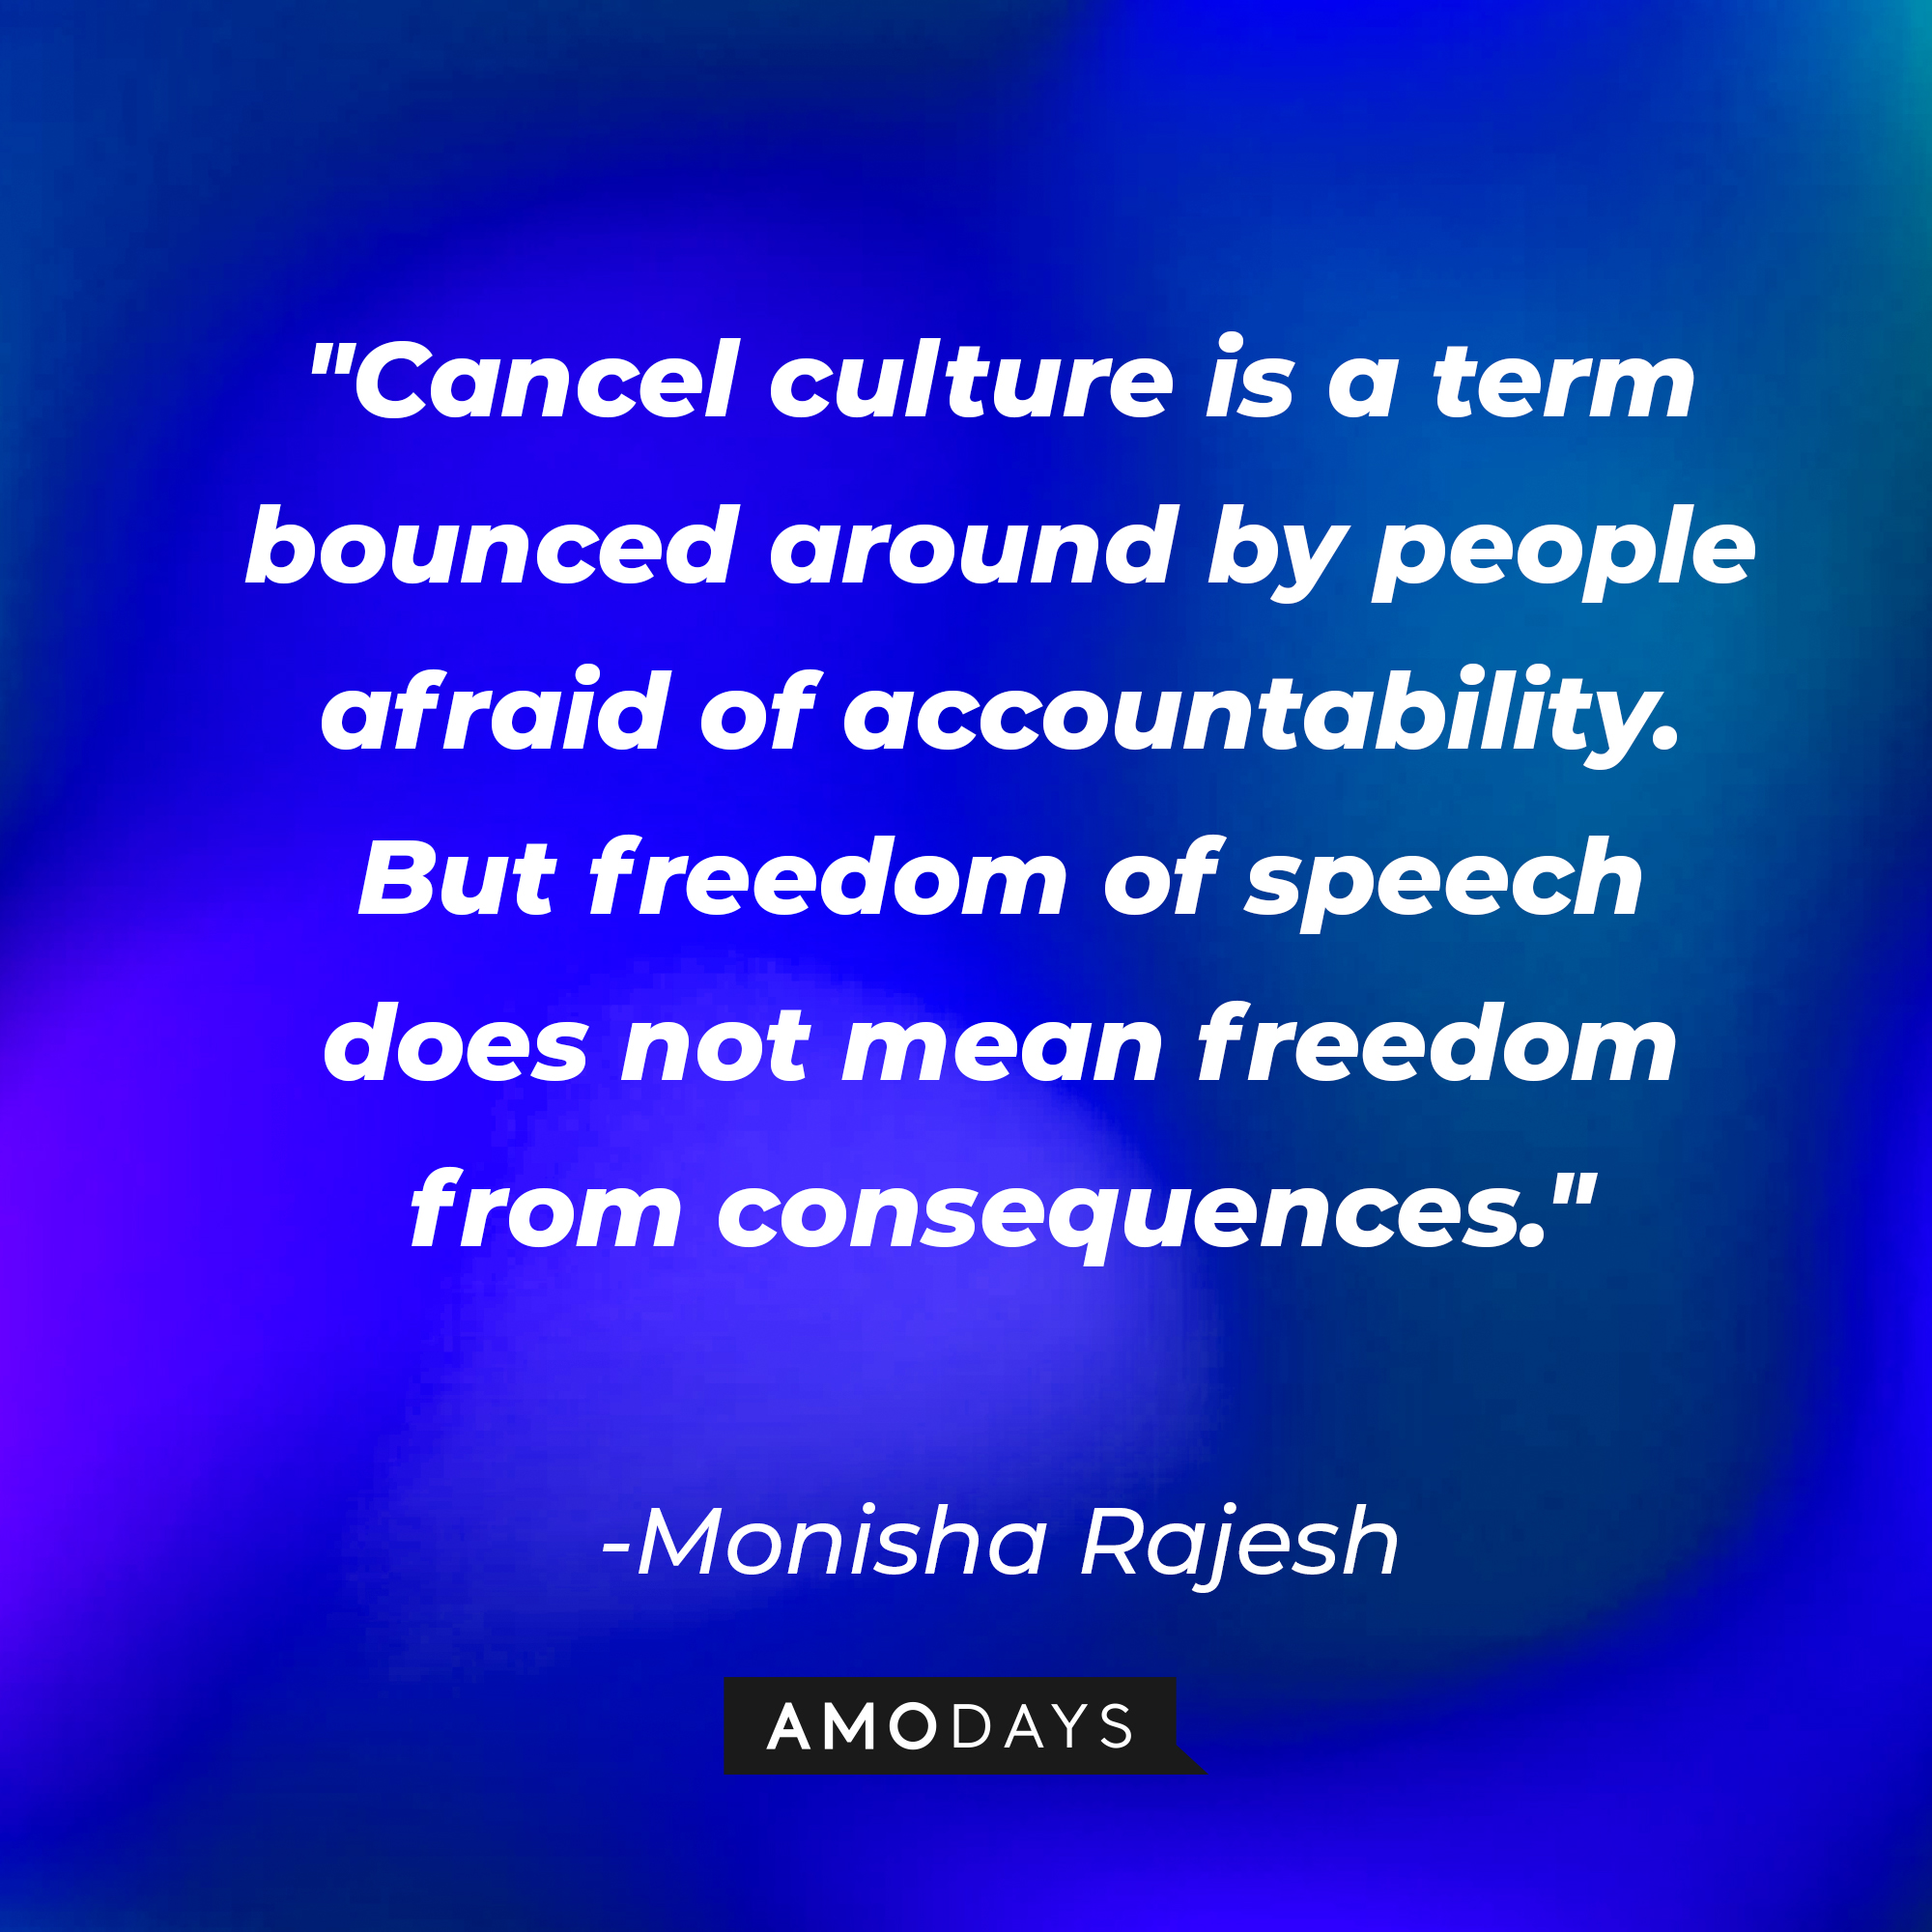 Monisha Rajesh's quote: "Cancel culture is a term bounced around by people afraid of accountability. But freedom of speech does not mean freedom from consequences." | Source: AmoDays